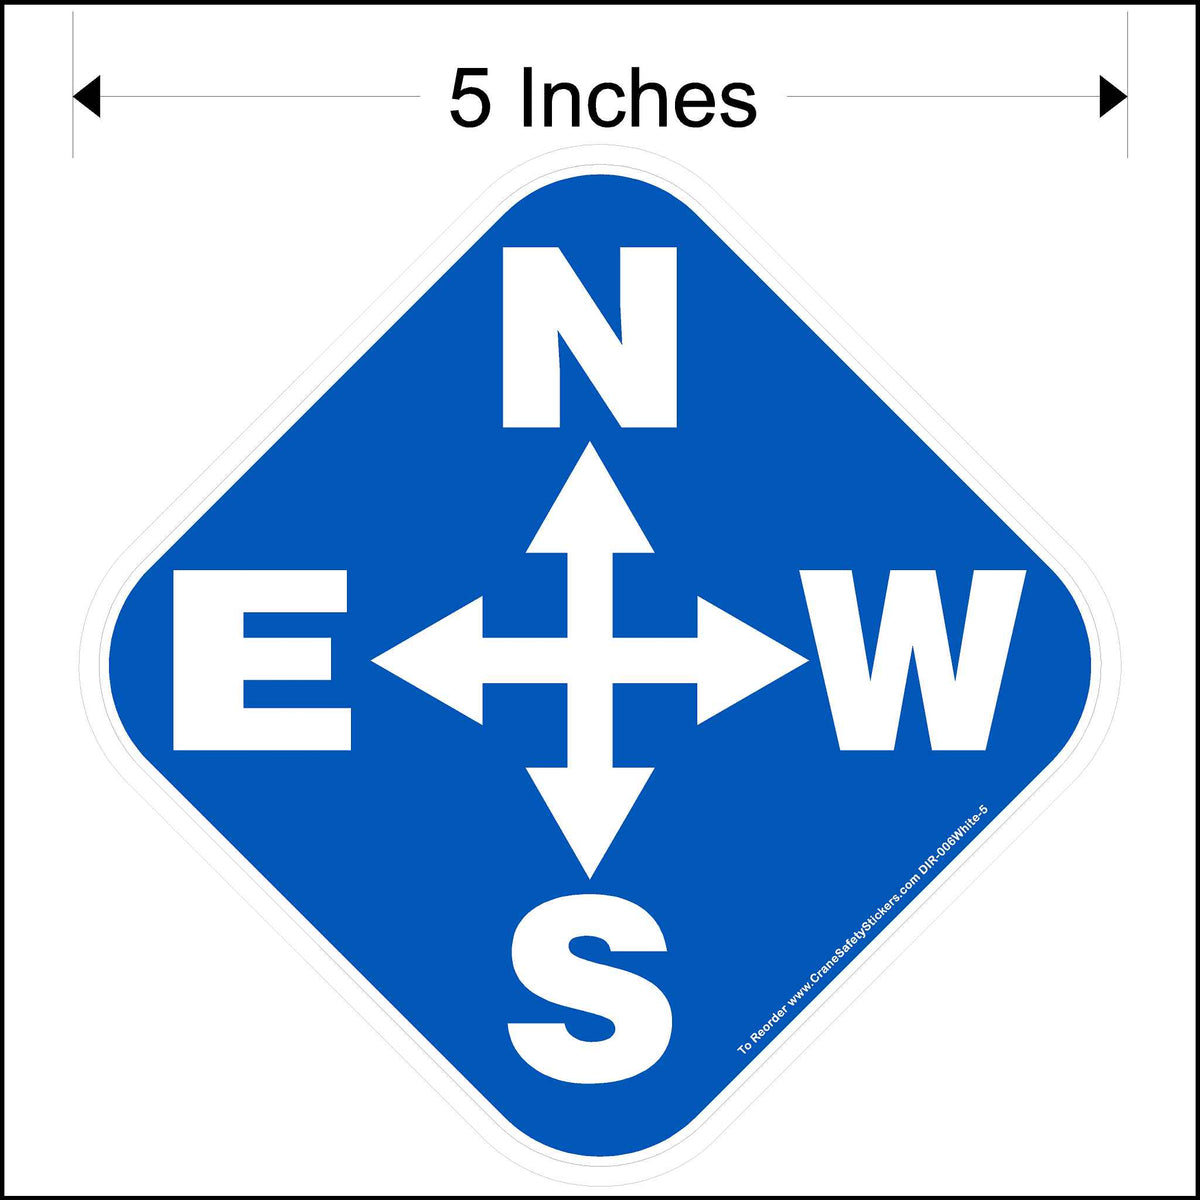 Overhead directional crane decal with white lettering and blue background. Decal size is 5 inches square.